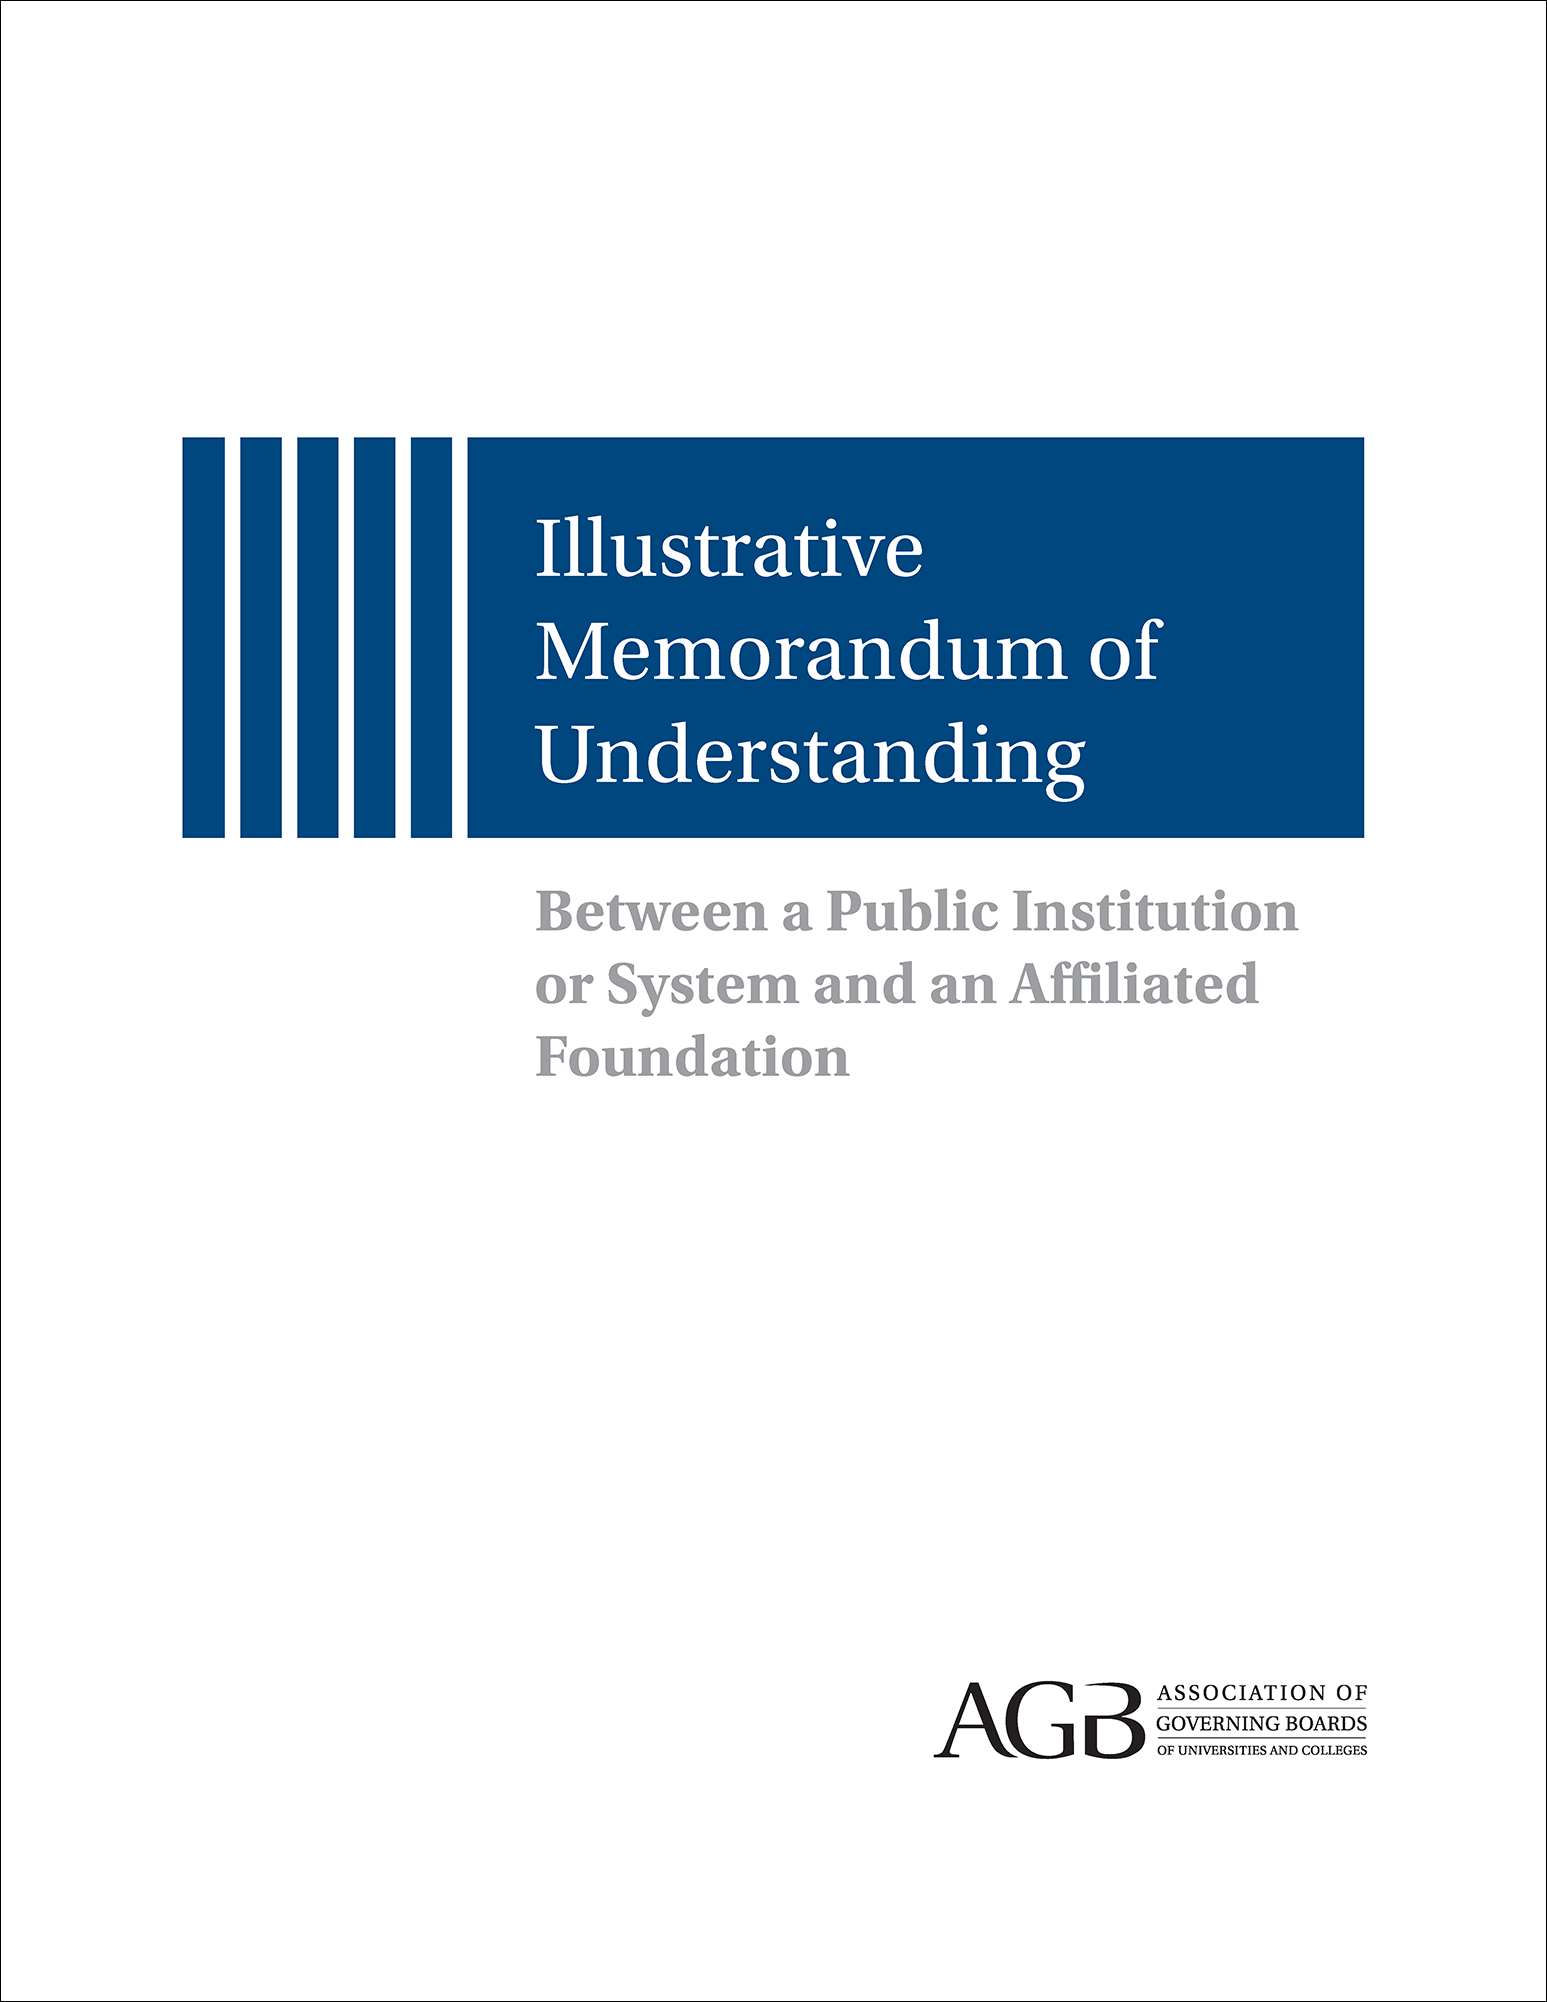 Illustrative Memorandum of Understanding Between a Public Institution or System and an Affiliated Foundation